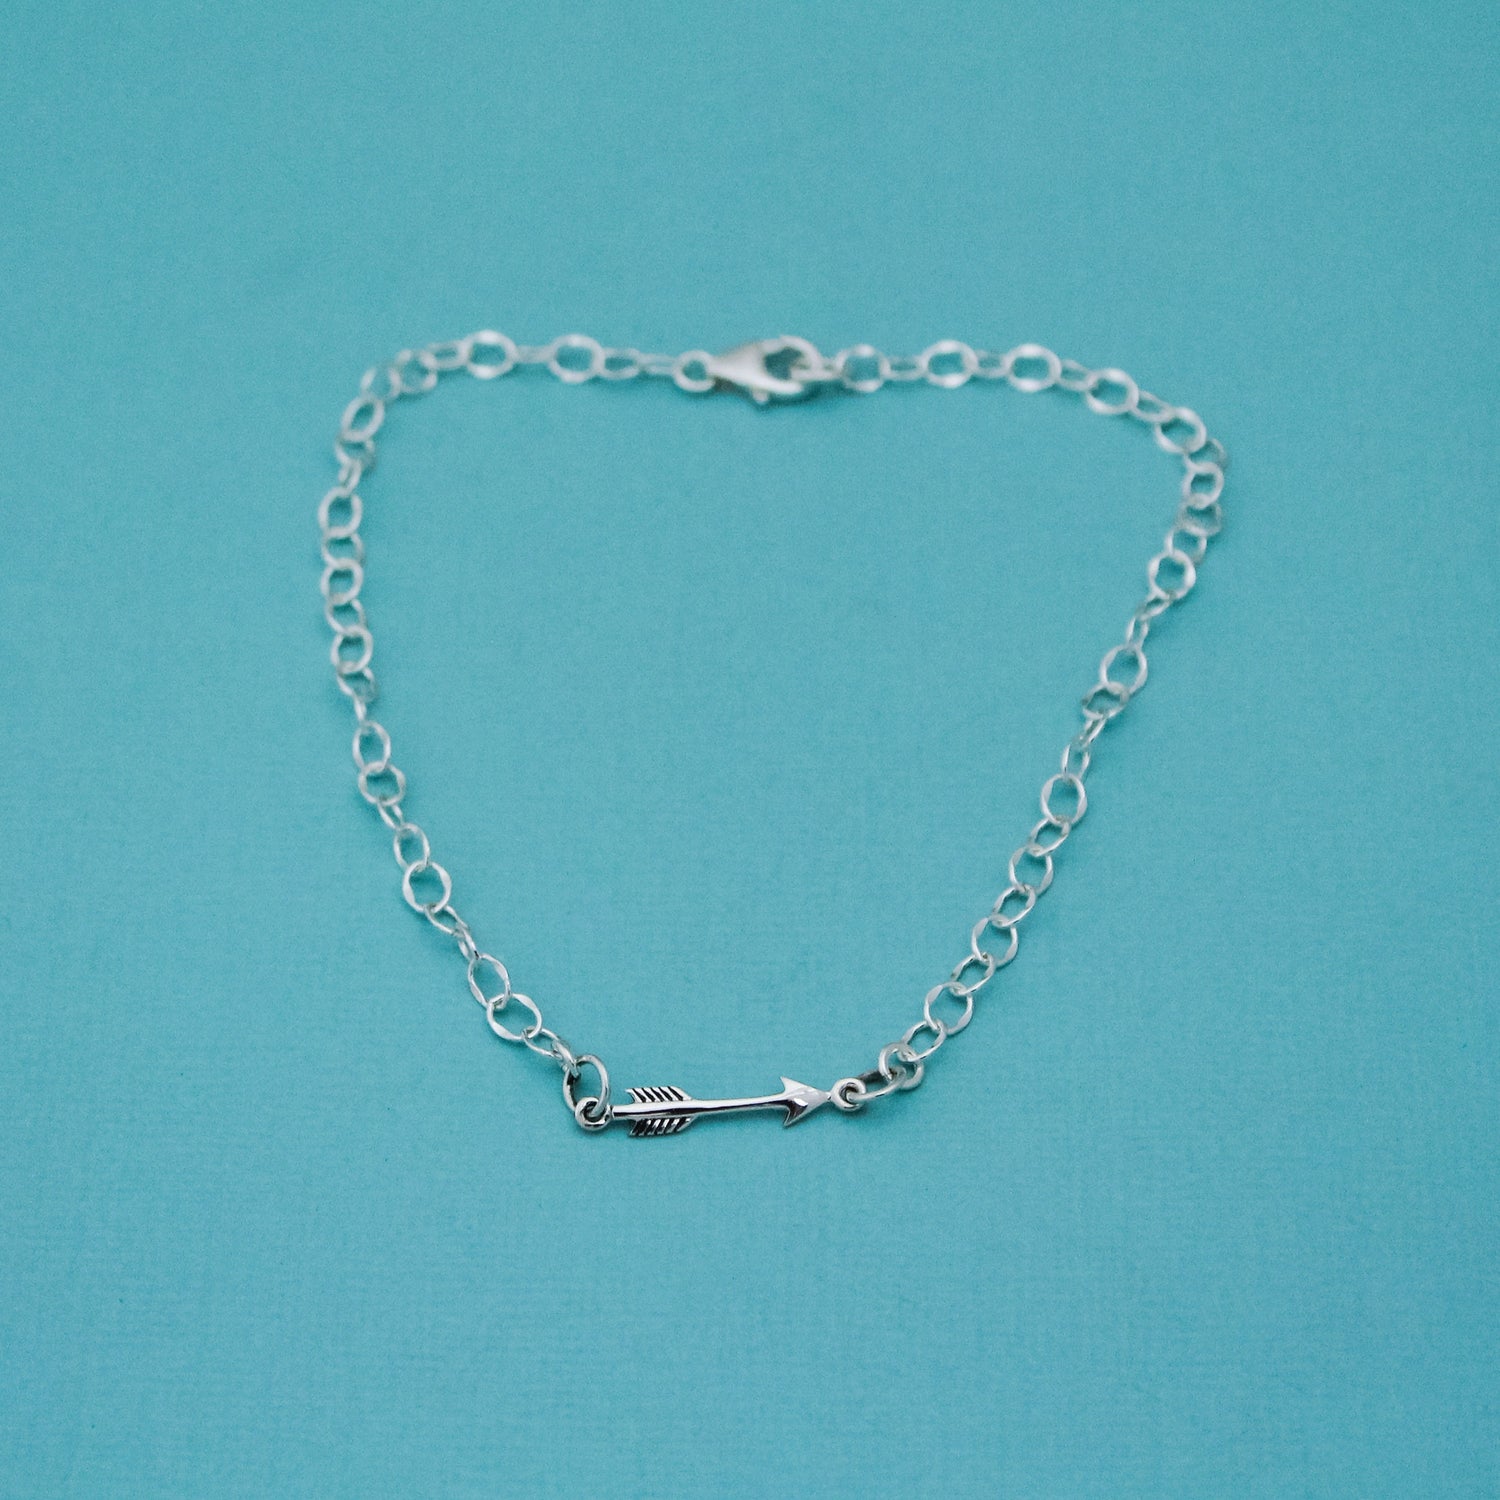 Arrow Anklet, Follow Your Arrow Anklet, Birthday Gift, Arrow Jewelry, Sterling Silver Anklet, Gifts for Her, Summer Cruise Jewelry